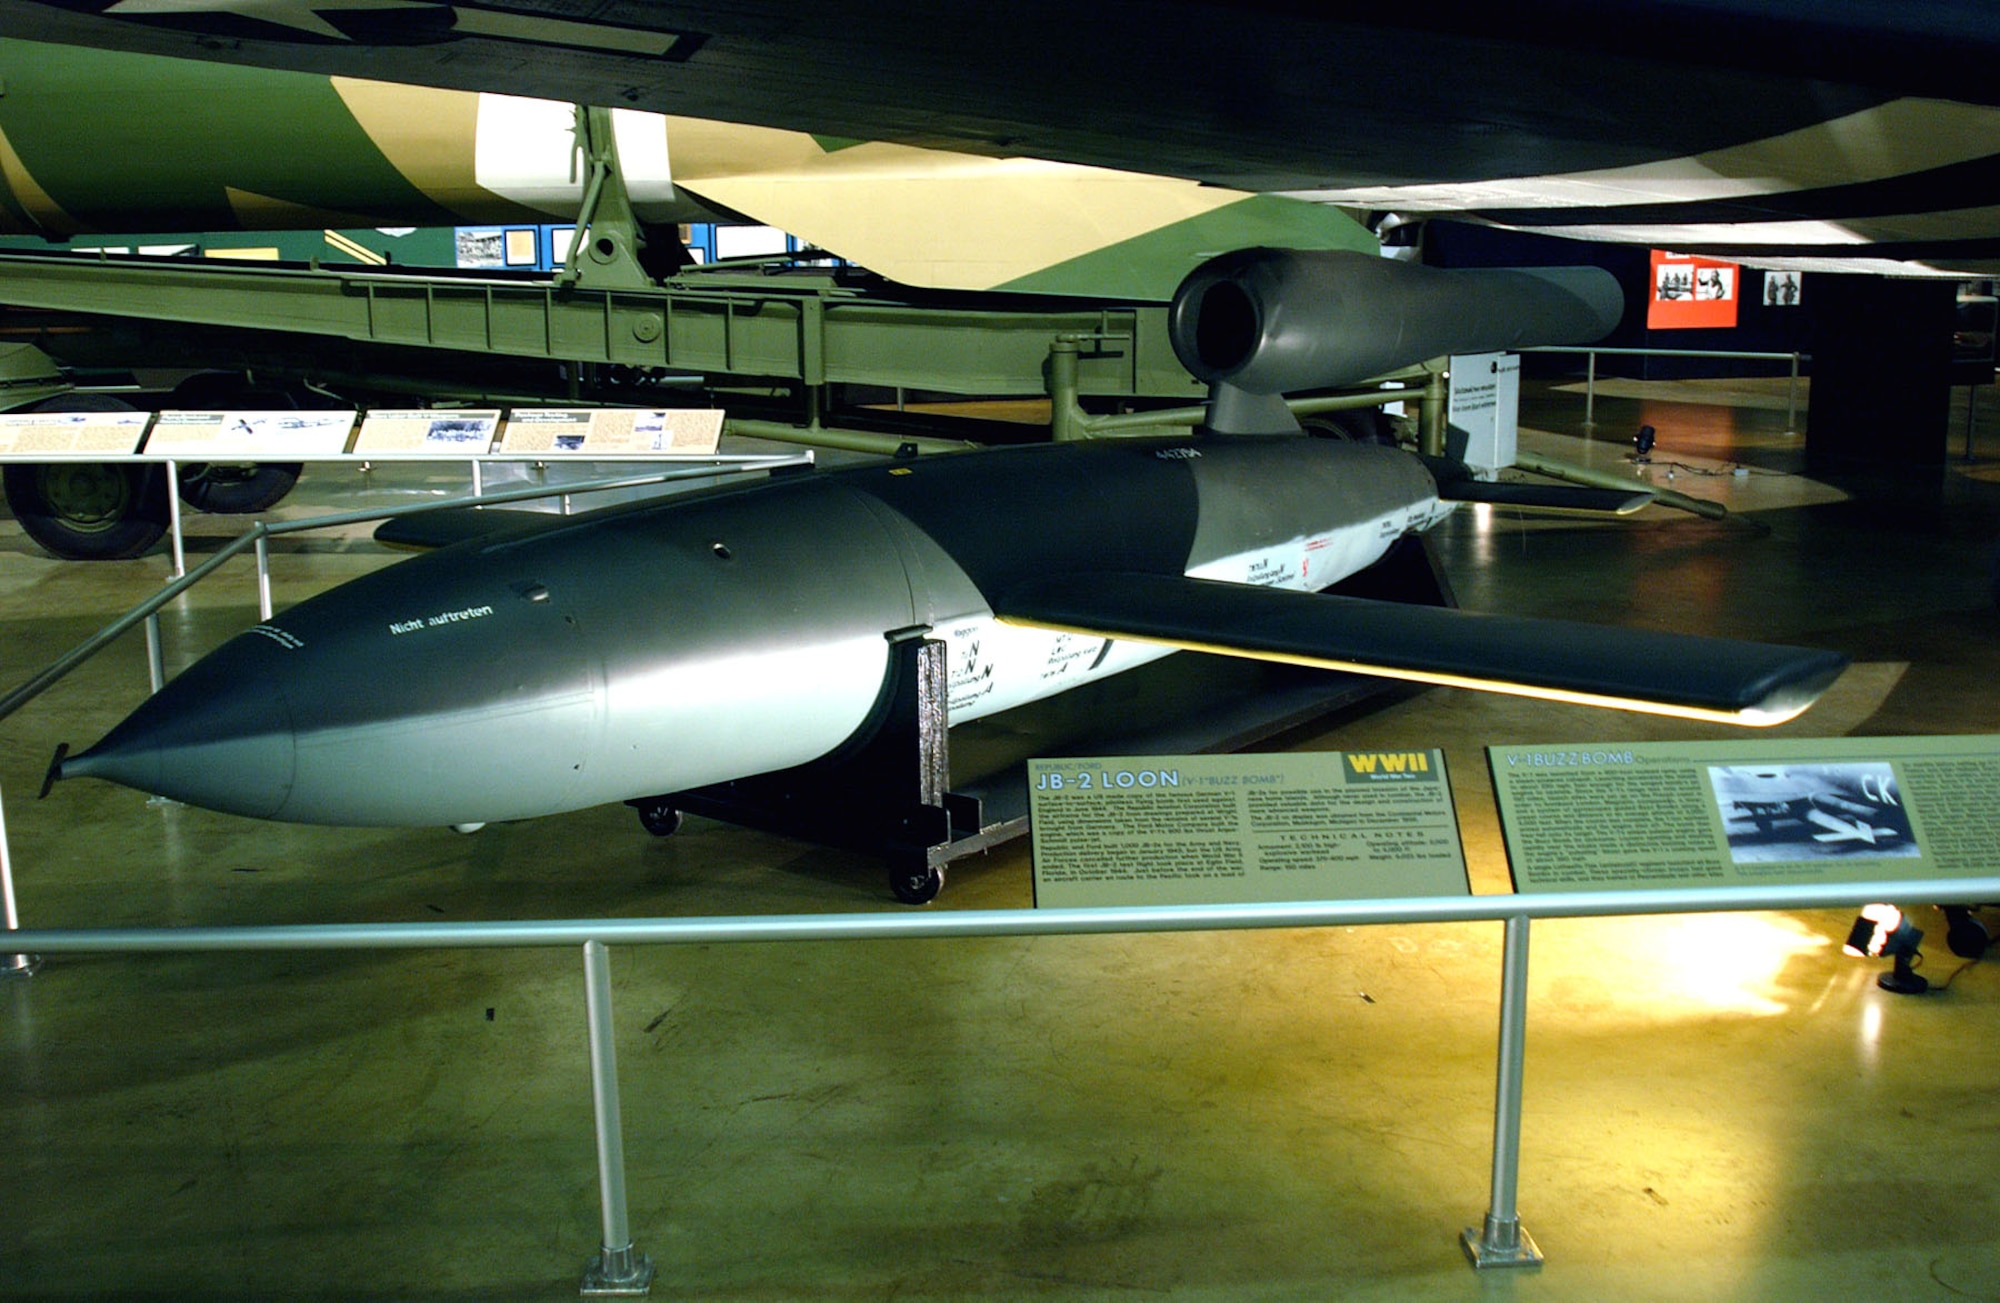 DAYTON, Ohio -- JB-2 Loon (V-1 Buzz Bomb) in the World War II Gallery at the National Museum of the United States Air Force. (U.S. Air Force photo)